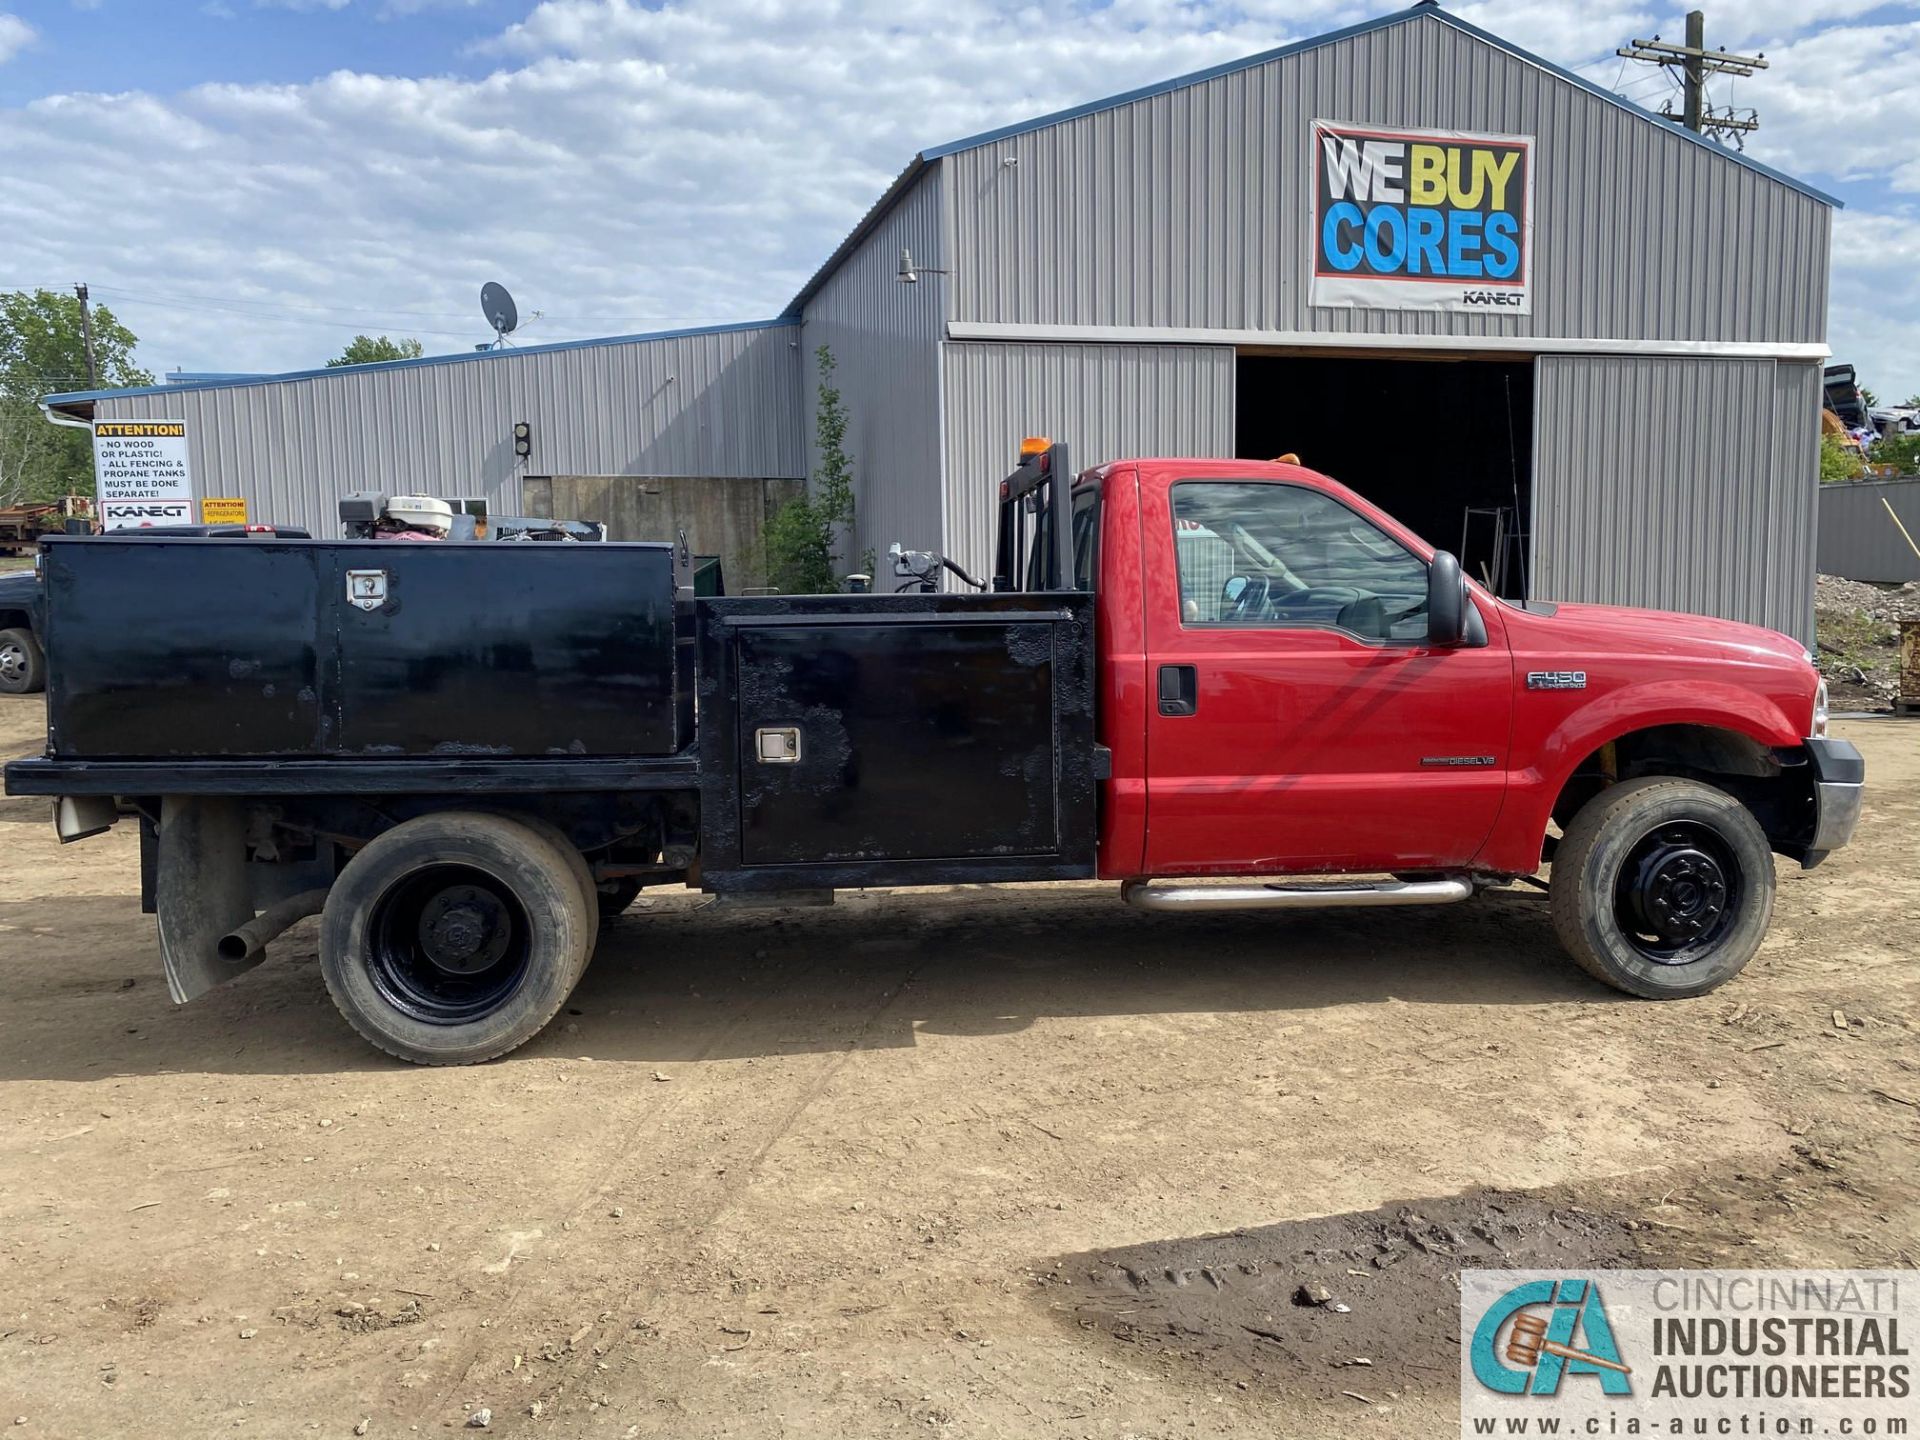 1999 FORD F450, 7.3 DIESEL 4X4 SERVICE TRUCK, MILES 292,503 - Image 3 of 9